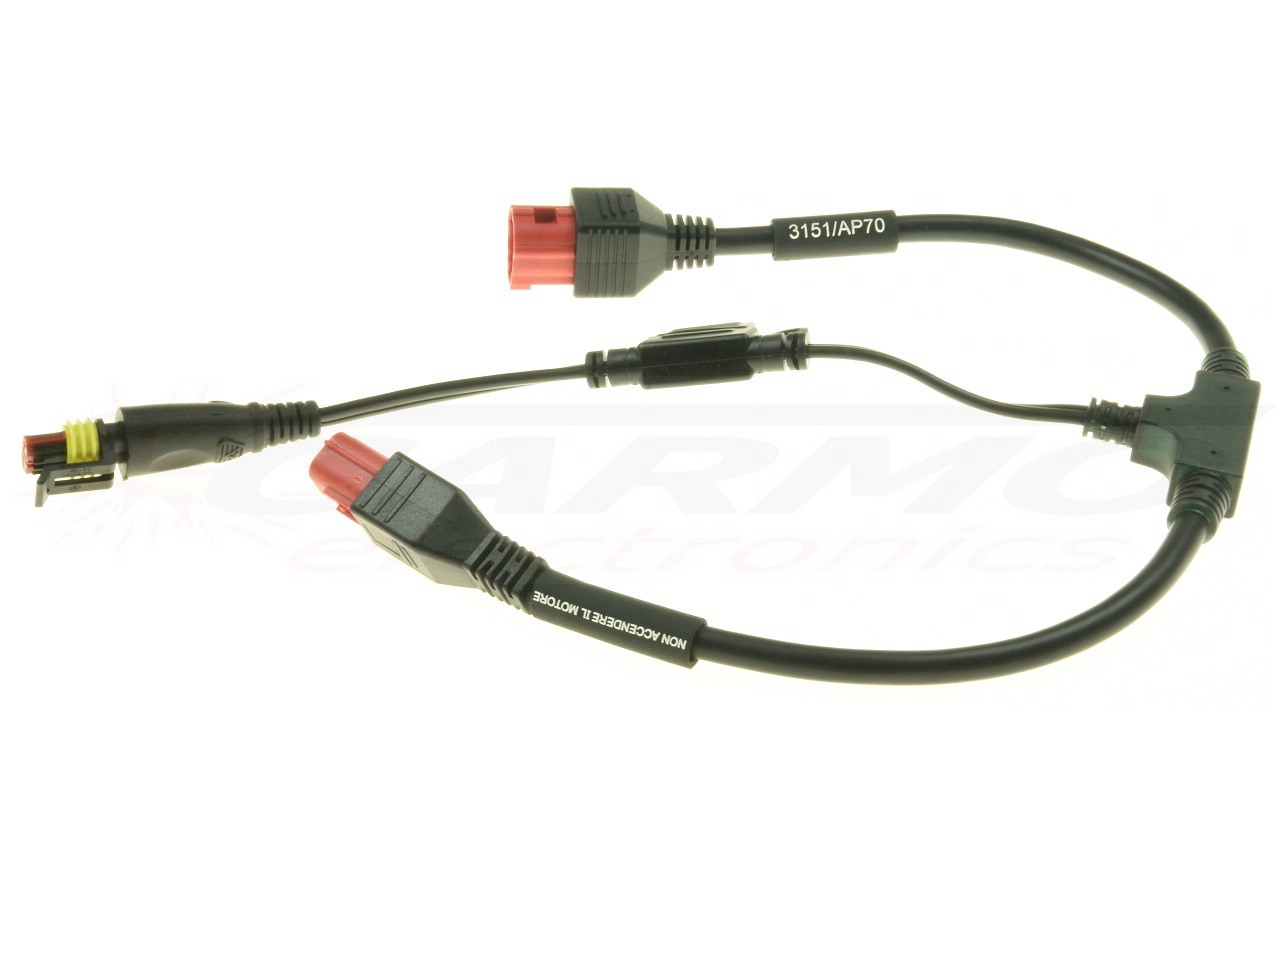 3151/AP70 Power adapter cable for Euro 5 vehicles without starter battery TEXA-3913660 - Clique na Imagem para Fechar